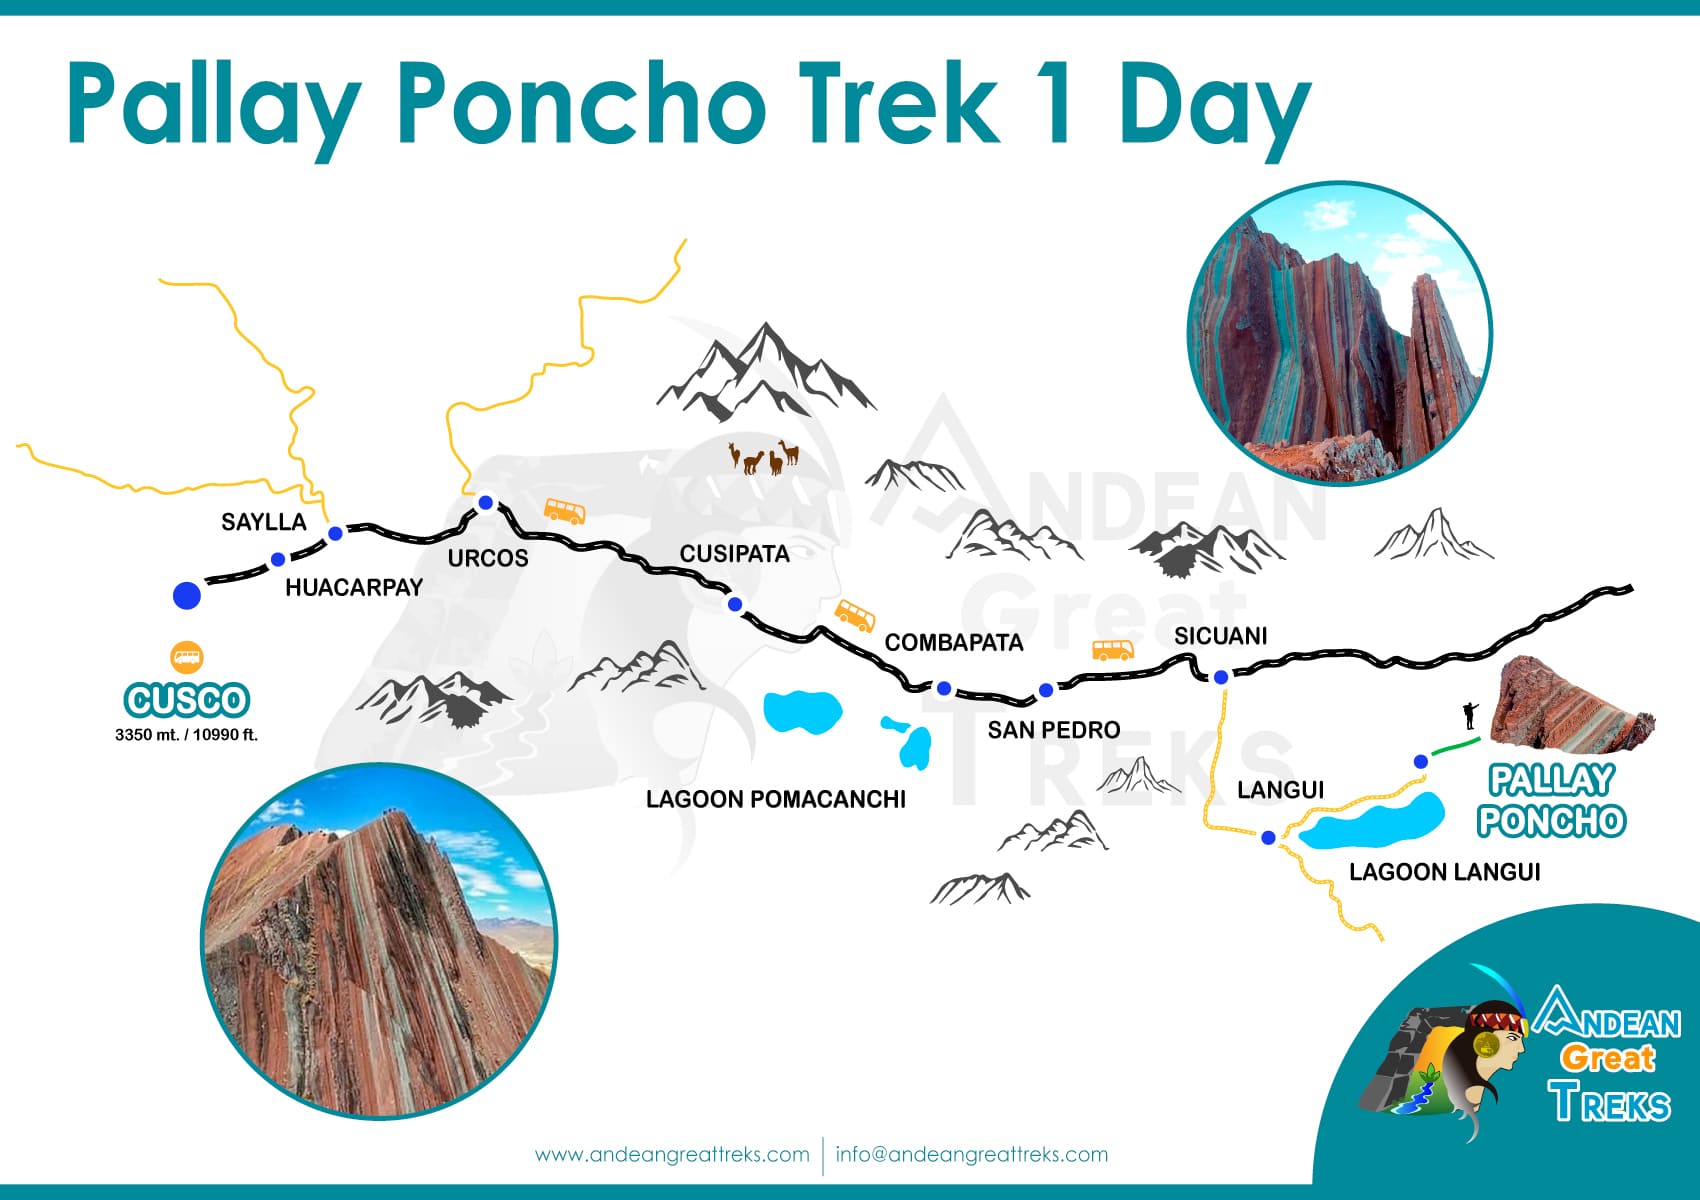 PALLAY-PONCHO-TREK-1-DAY-BY-ANDEAN-GREAT-TREKS